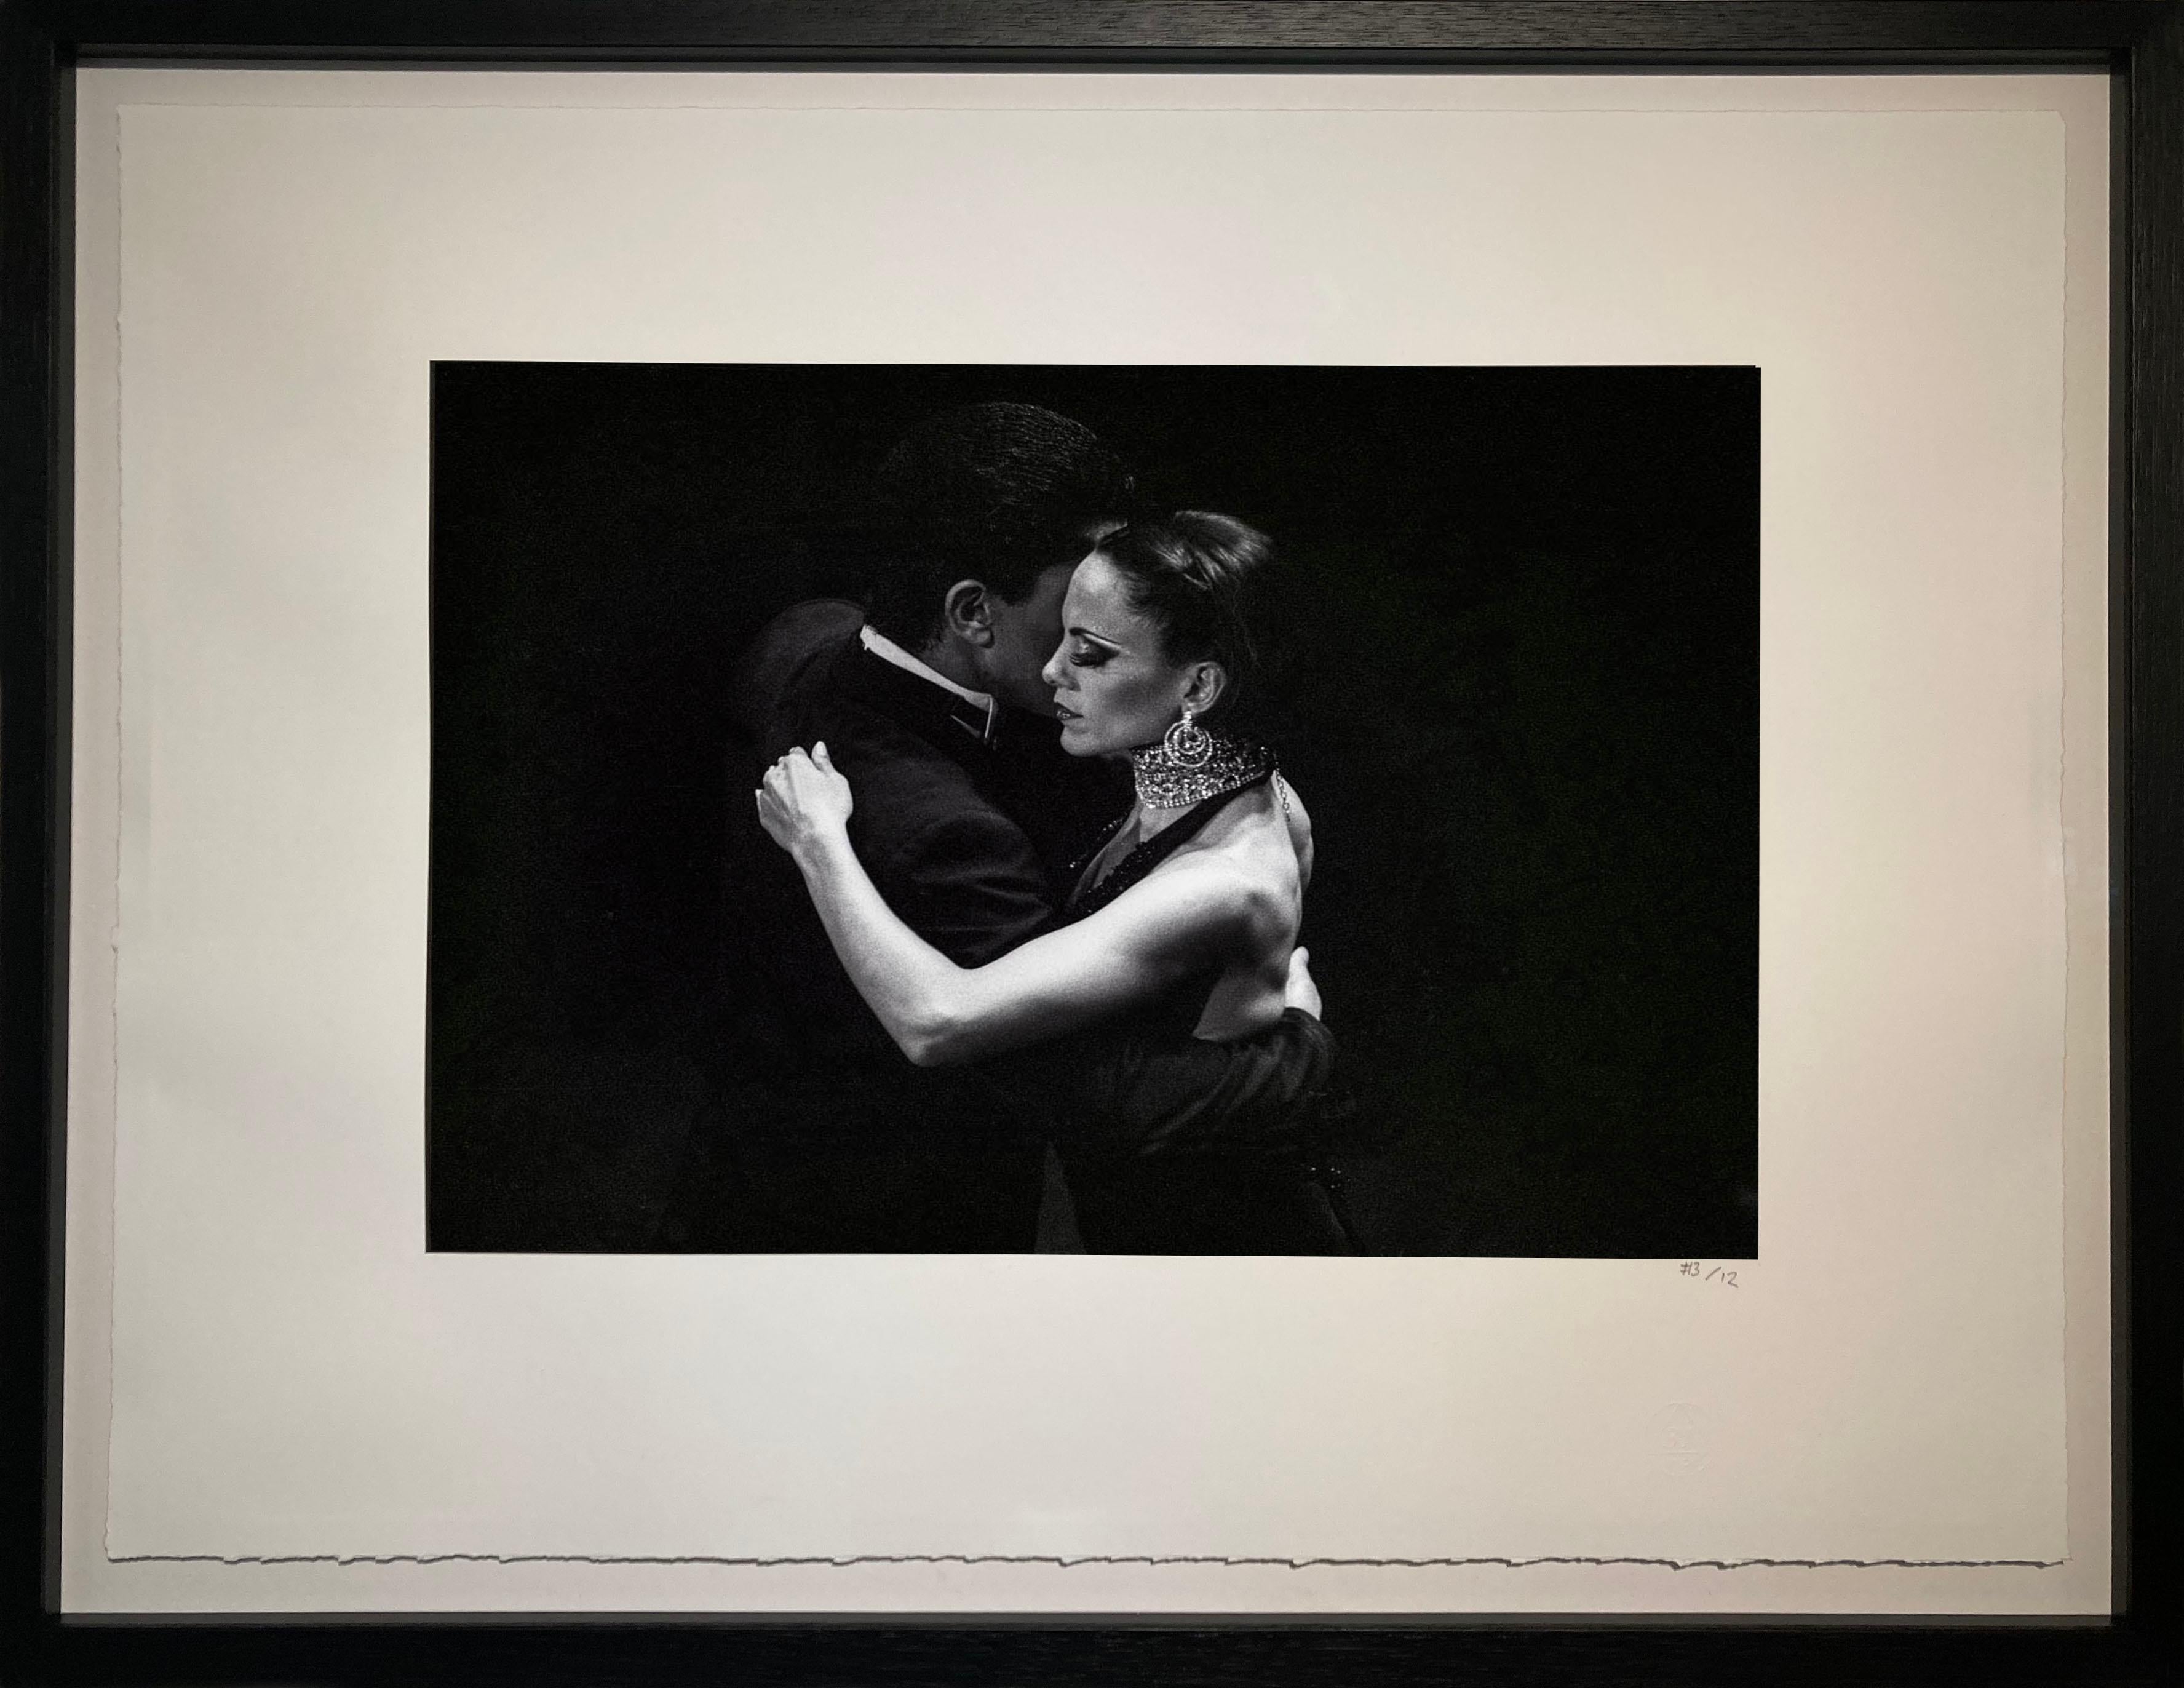 Dreams of a moment…

James Sparshatt’s photographs of music and dance capture the emotion and intensity of people lost in the rhythm of the moment.

The work is available as silver gelatin and palladium platinum prints.

Palladium platinum